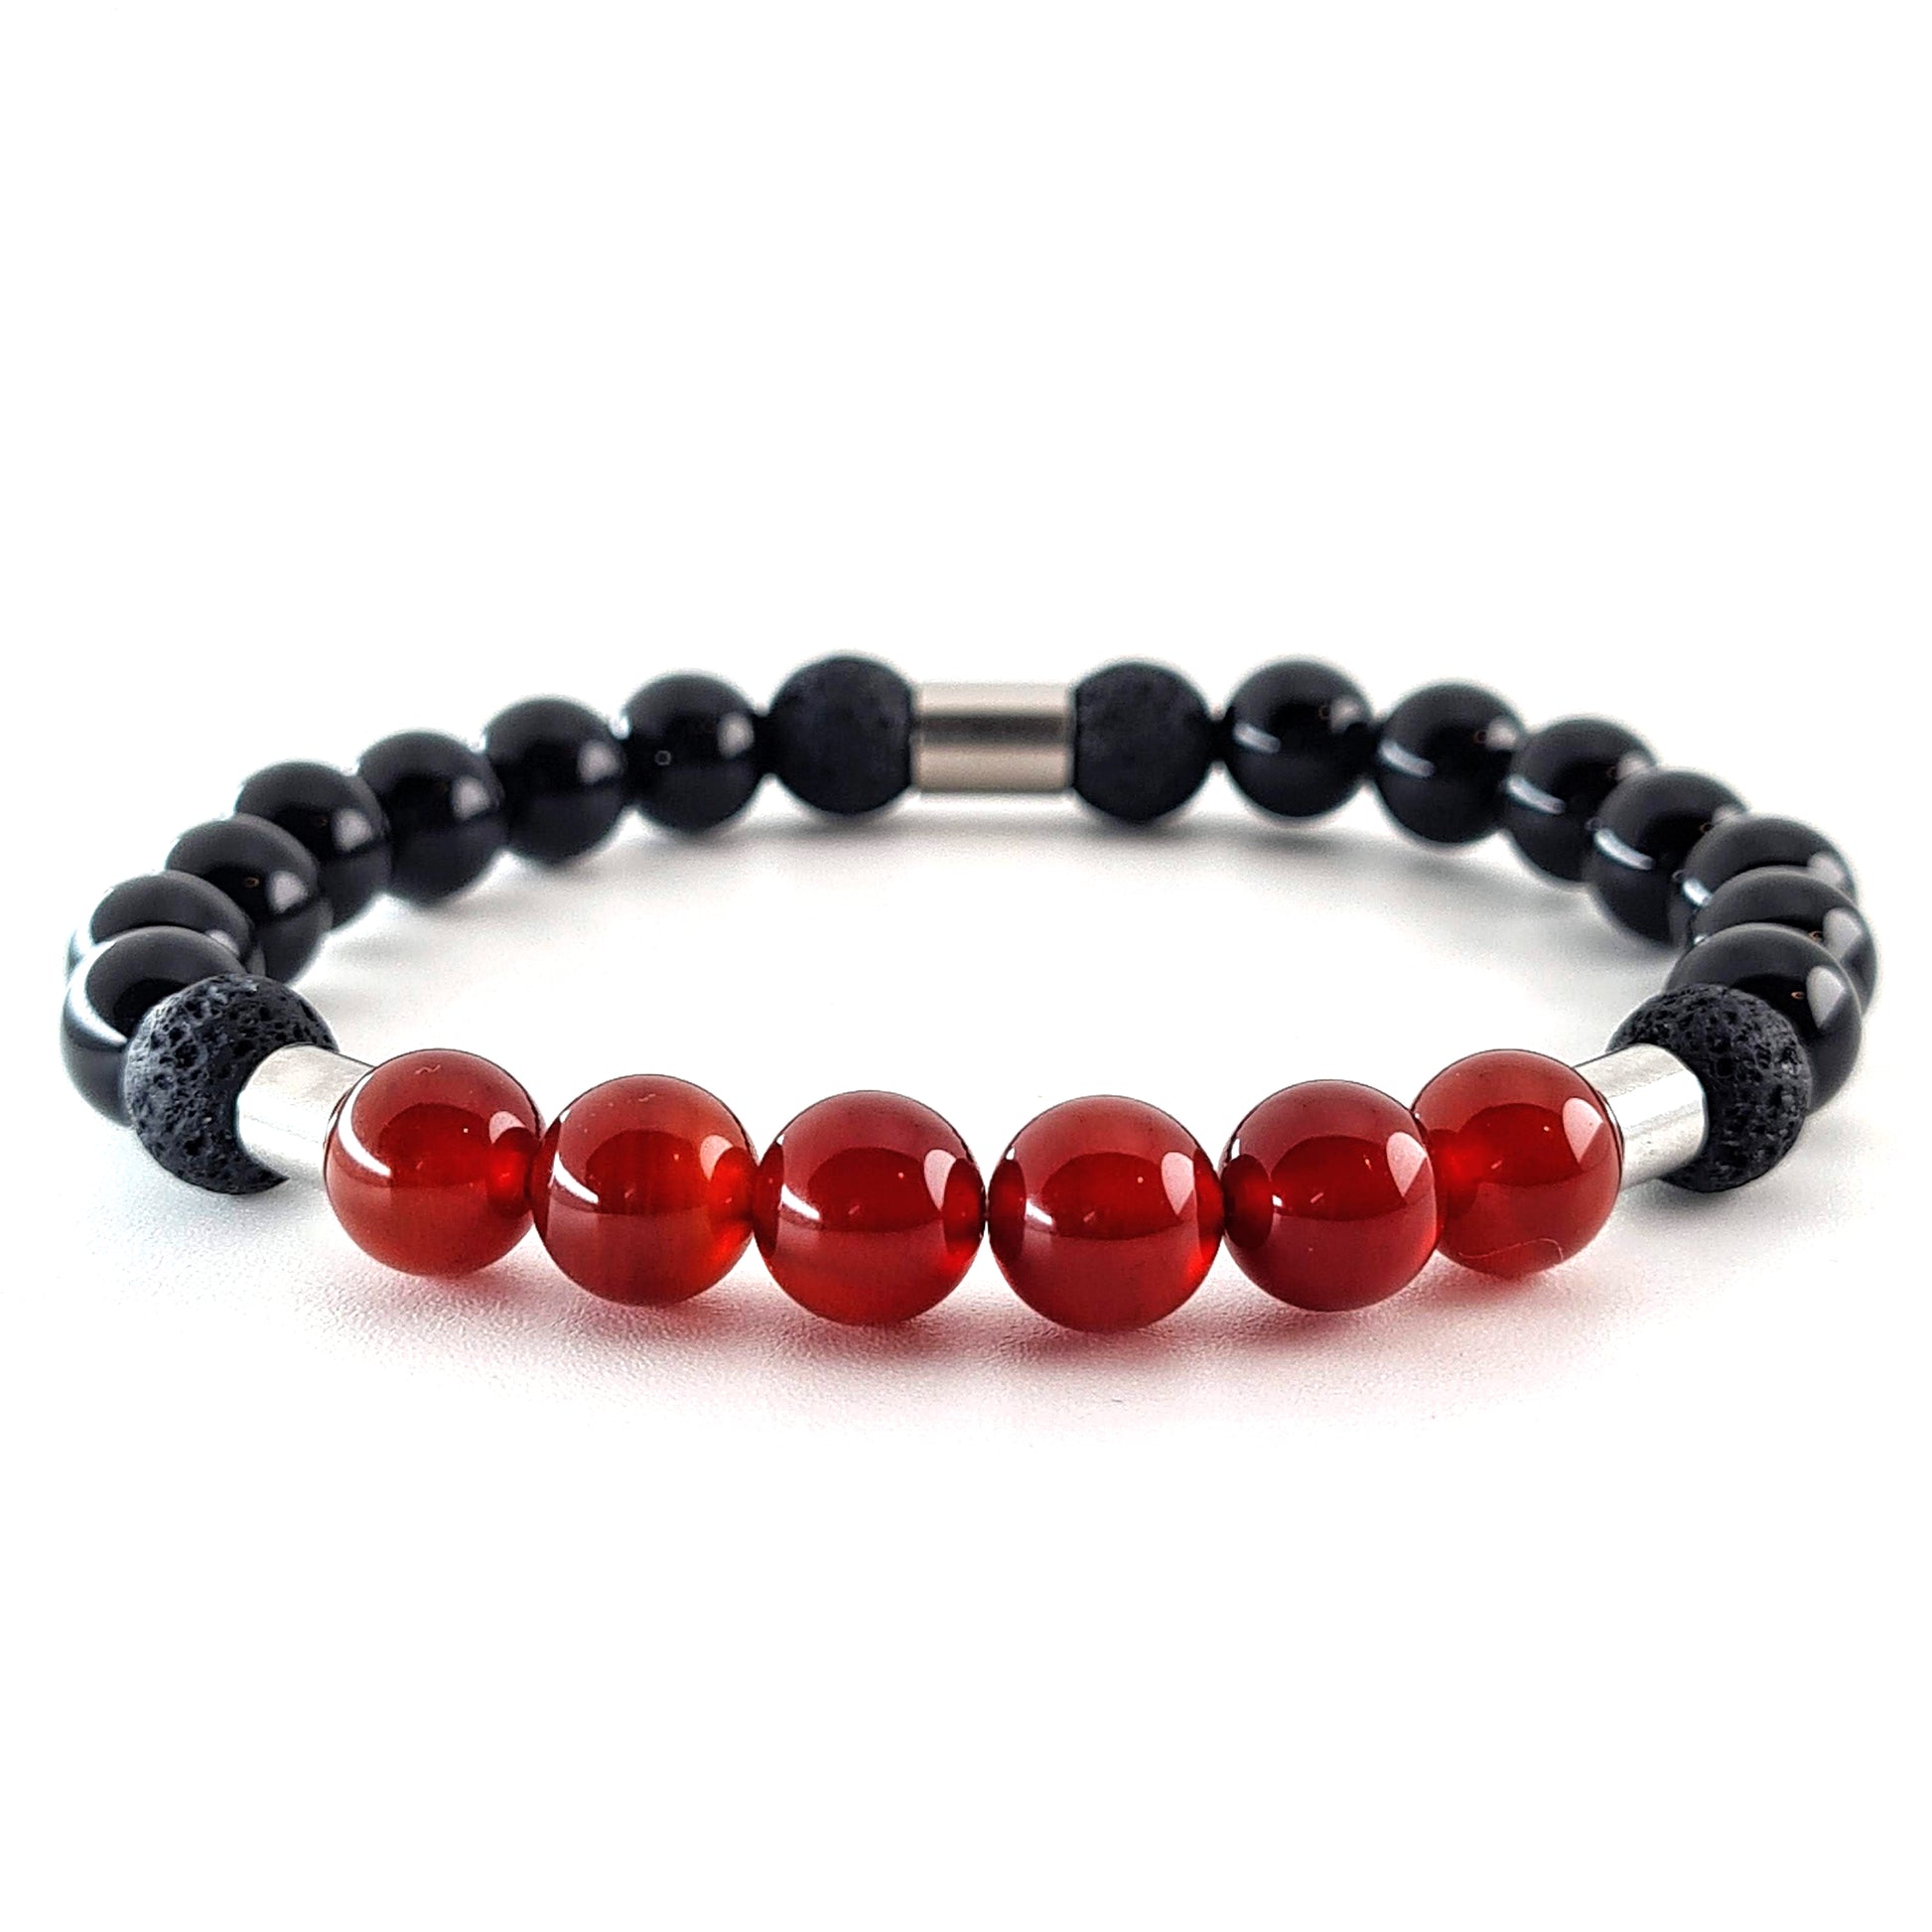 Onyx, Lava Stone and Carnelian with steel accessories